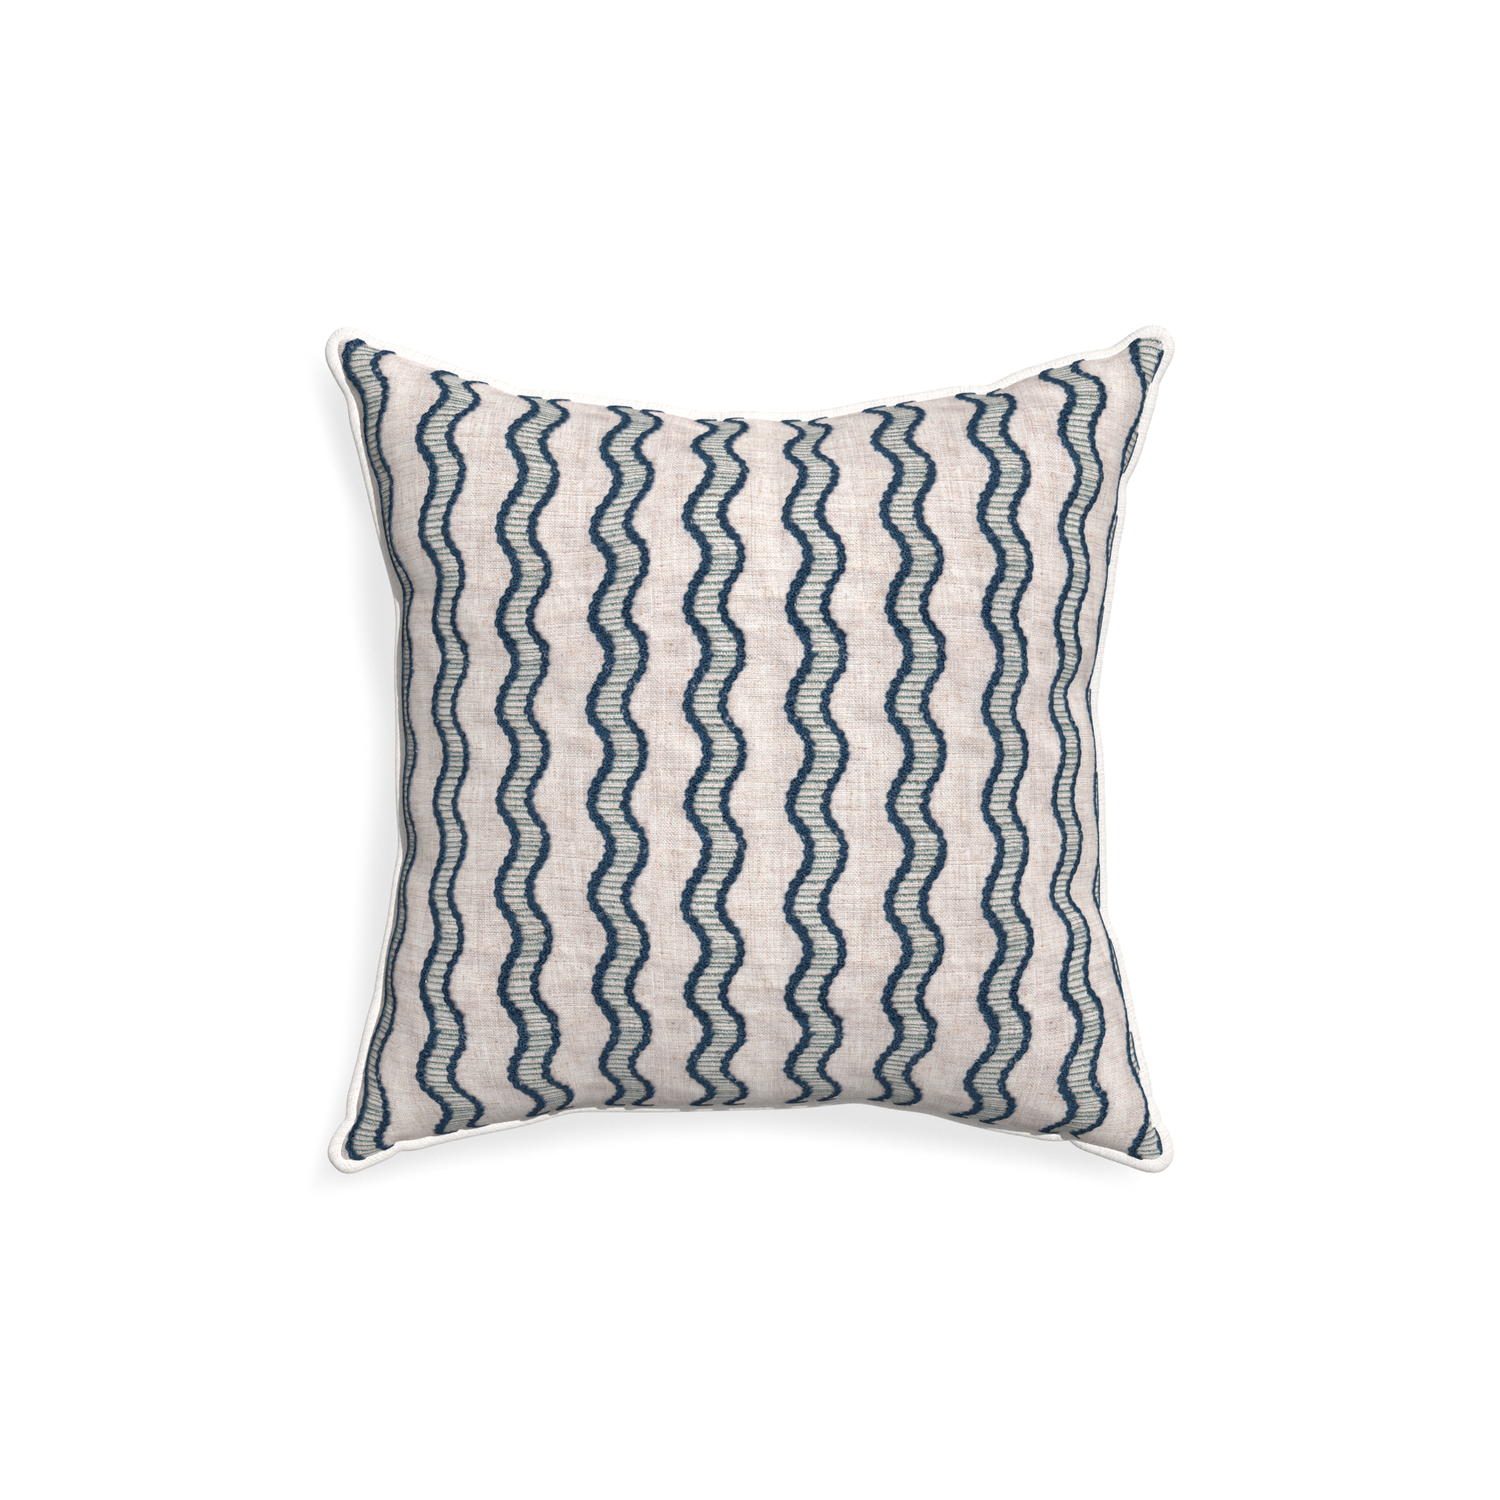 18-square beatrice custom embroidered wavepillow with snow piping on white background